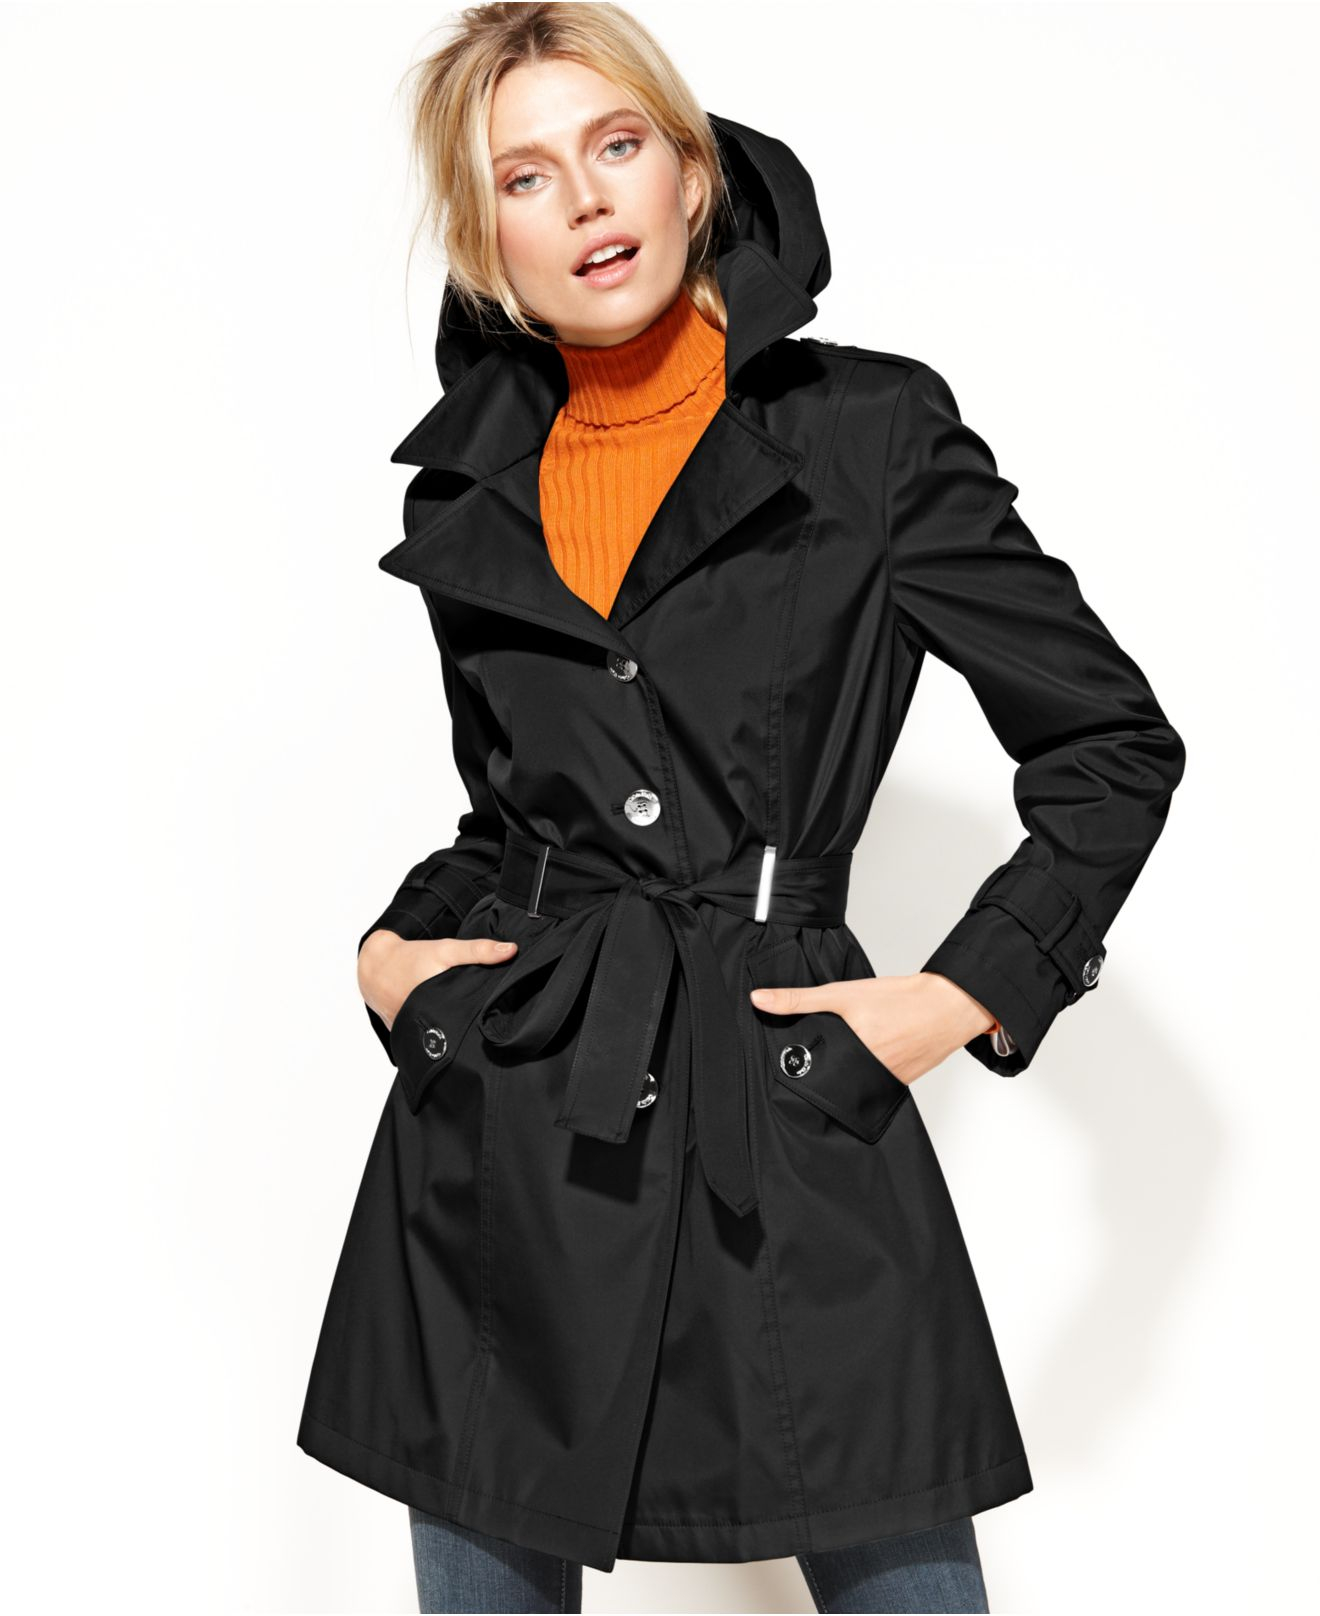 Calvin Klein Hooded Belted Trench Coat in Black - Lyst